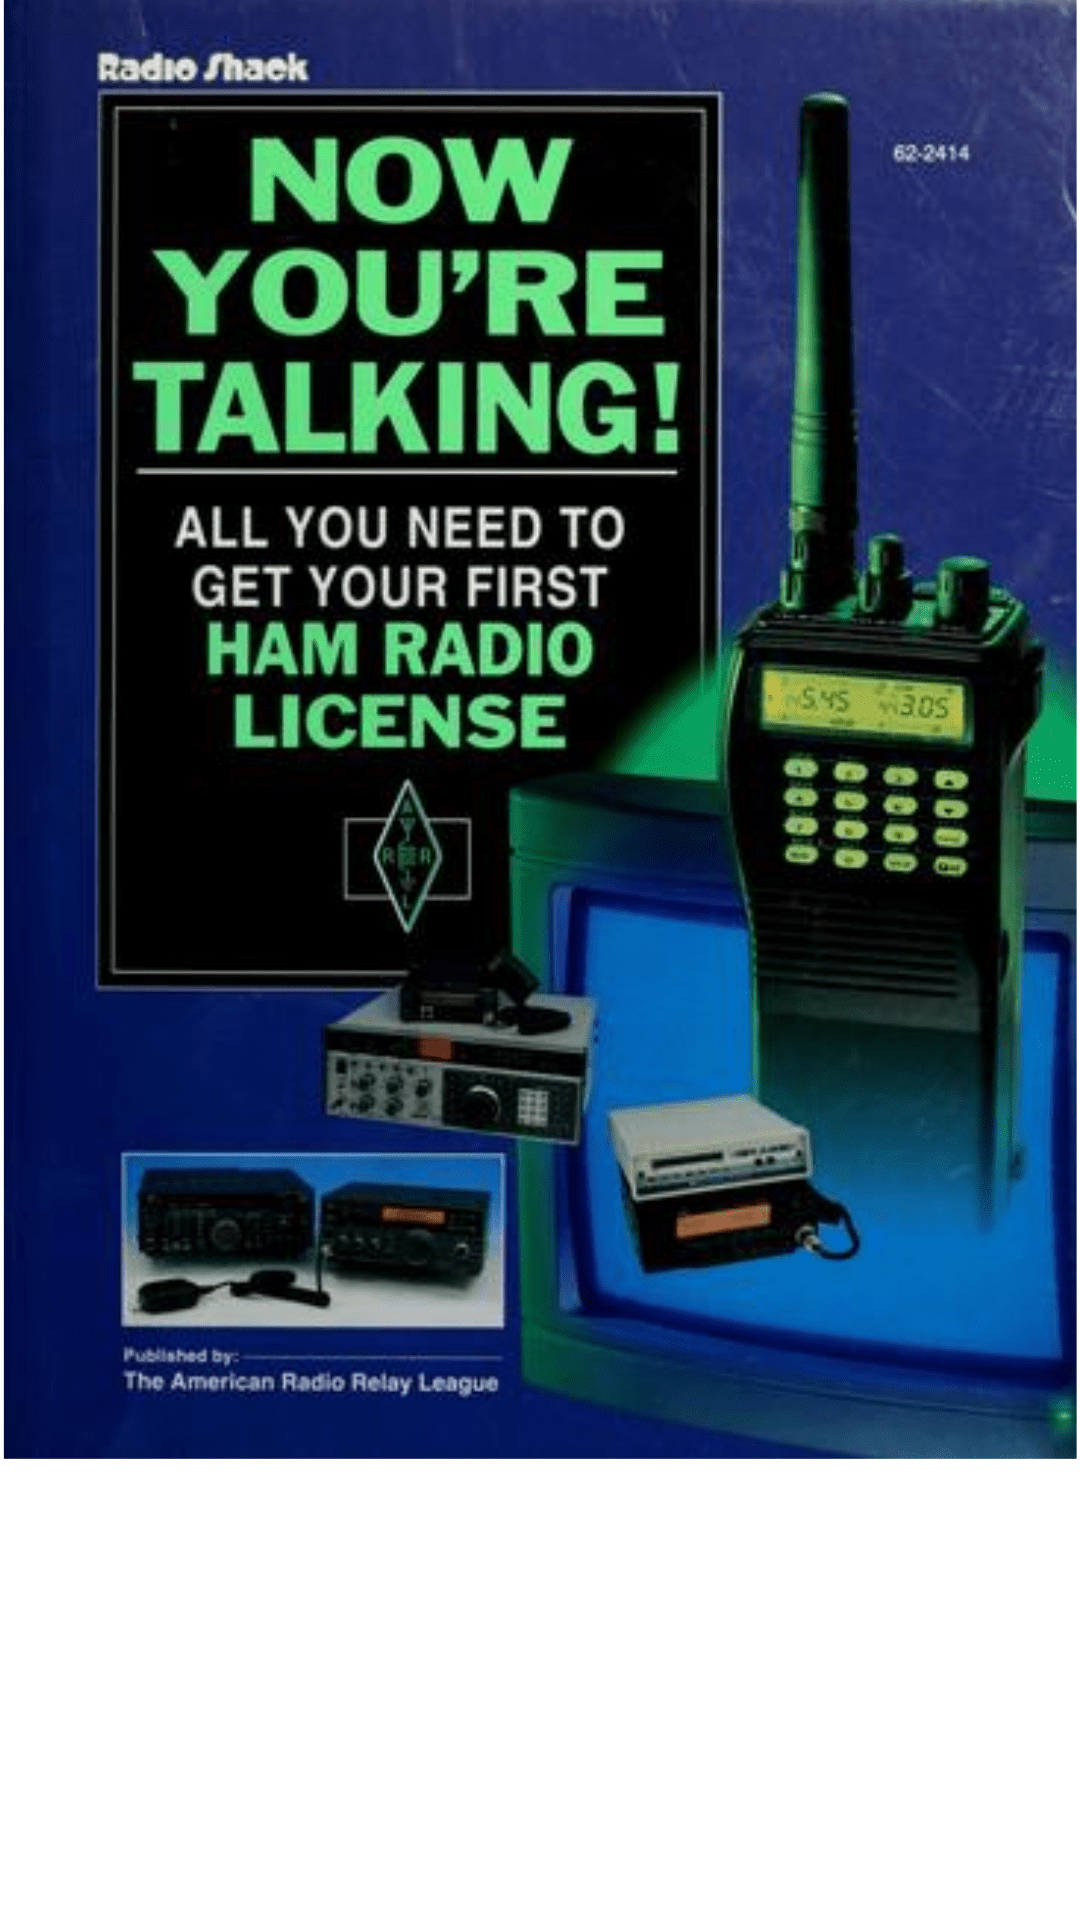 Now You're Talking! All You Need to Get Your First Amateur Radio License